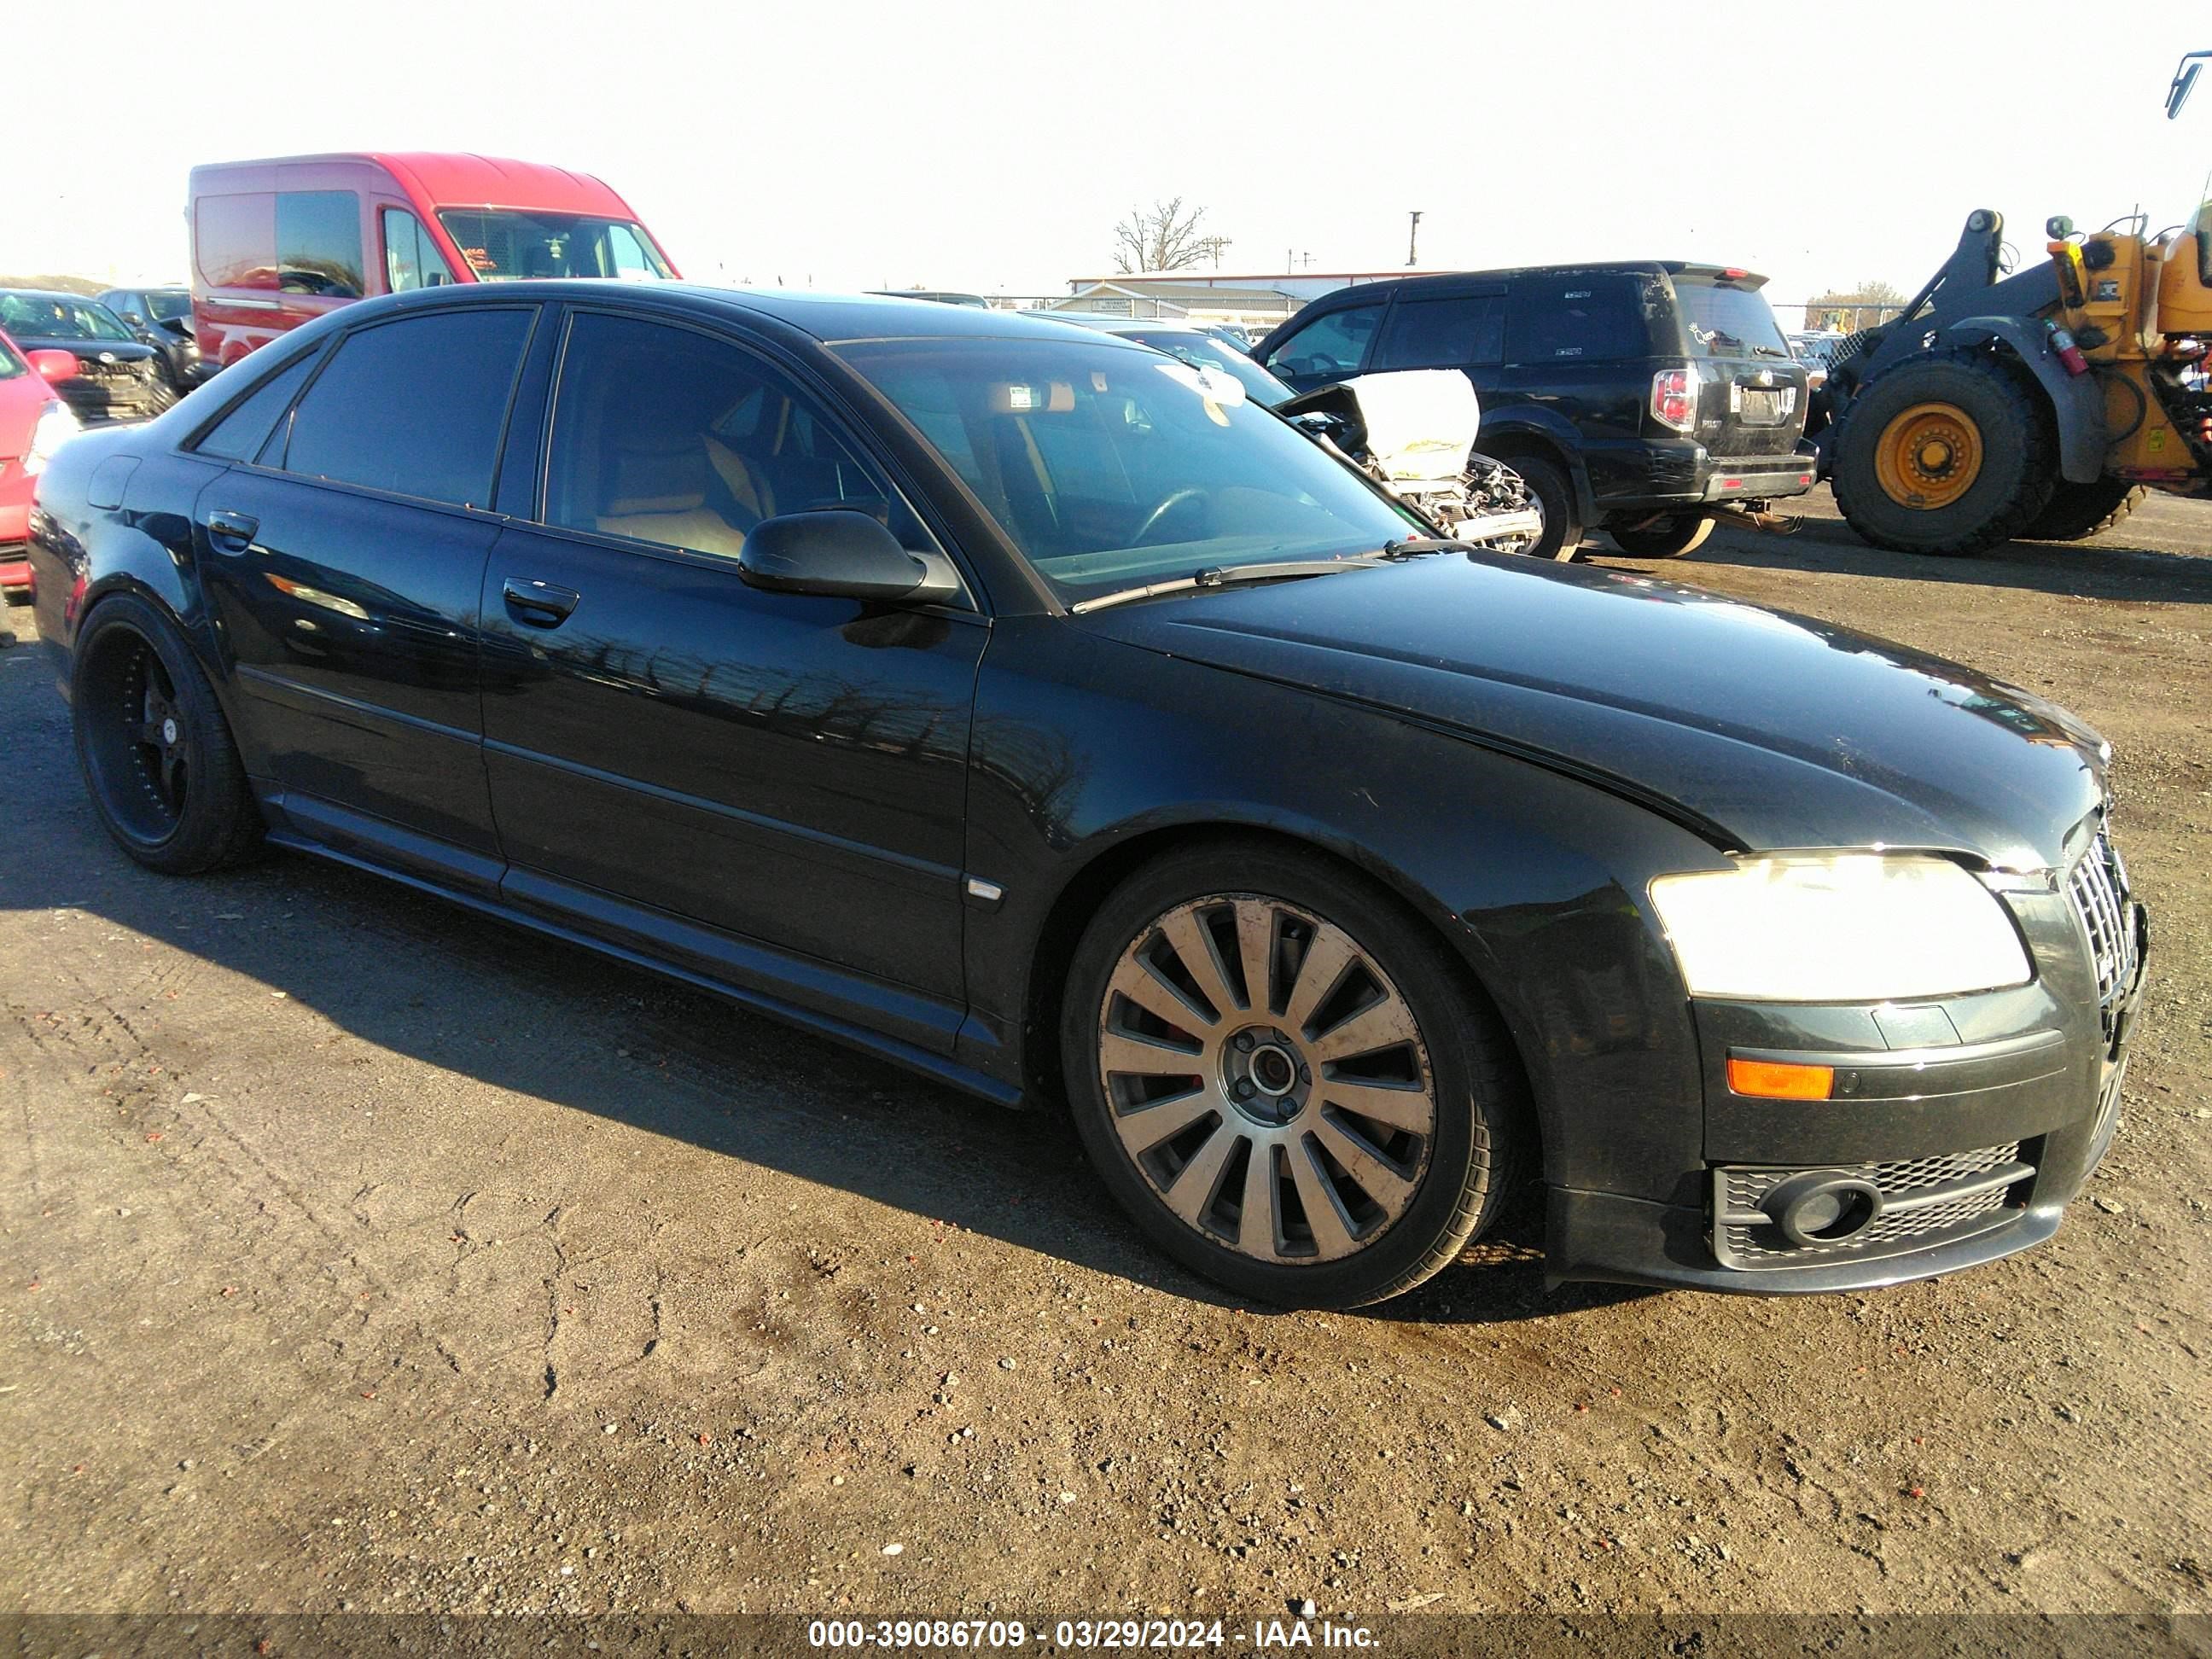 vin: WAULV44E47N020550 WAULV44E47N020550 2007 audi a8 4200 for Sale in 07001, 87 Randolph Ave, Avenel, New Jersey, USA